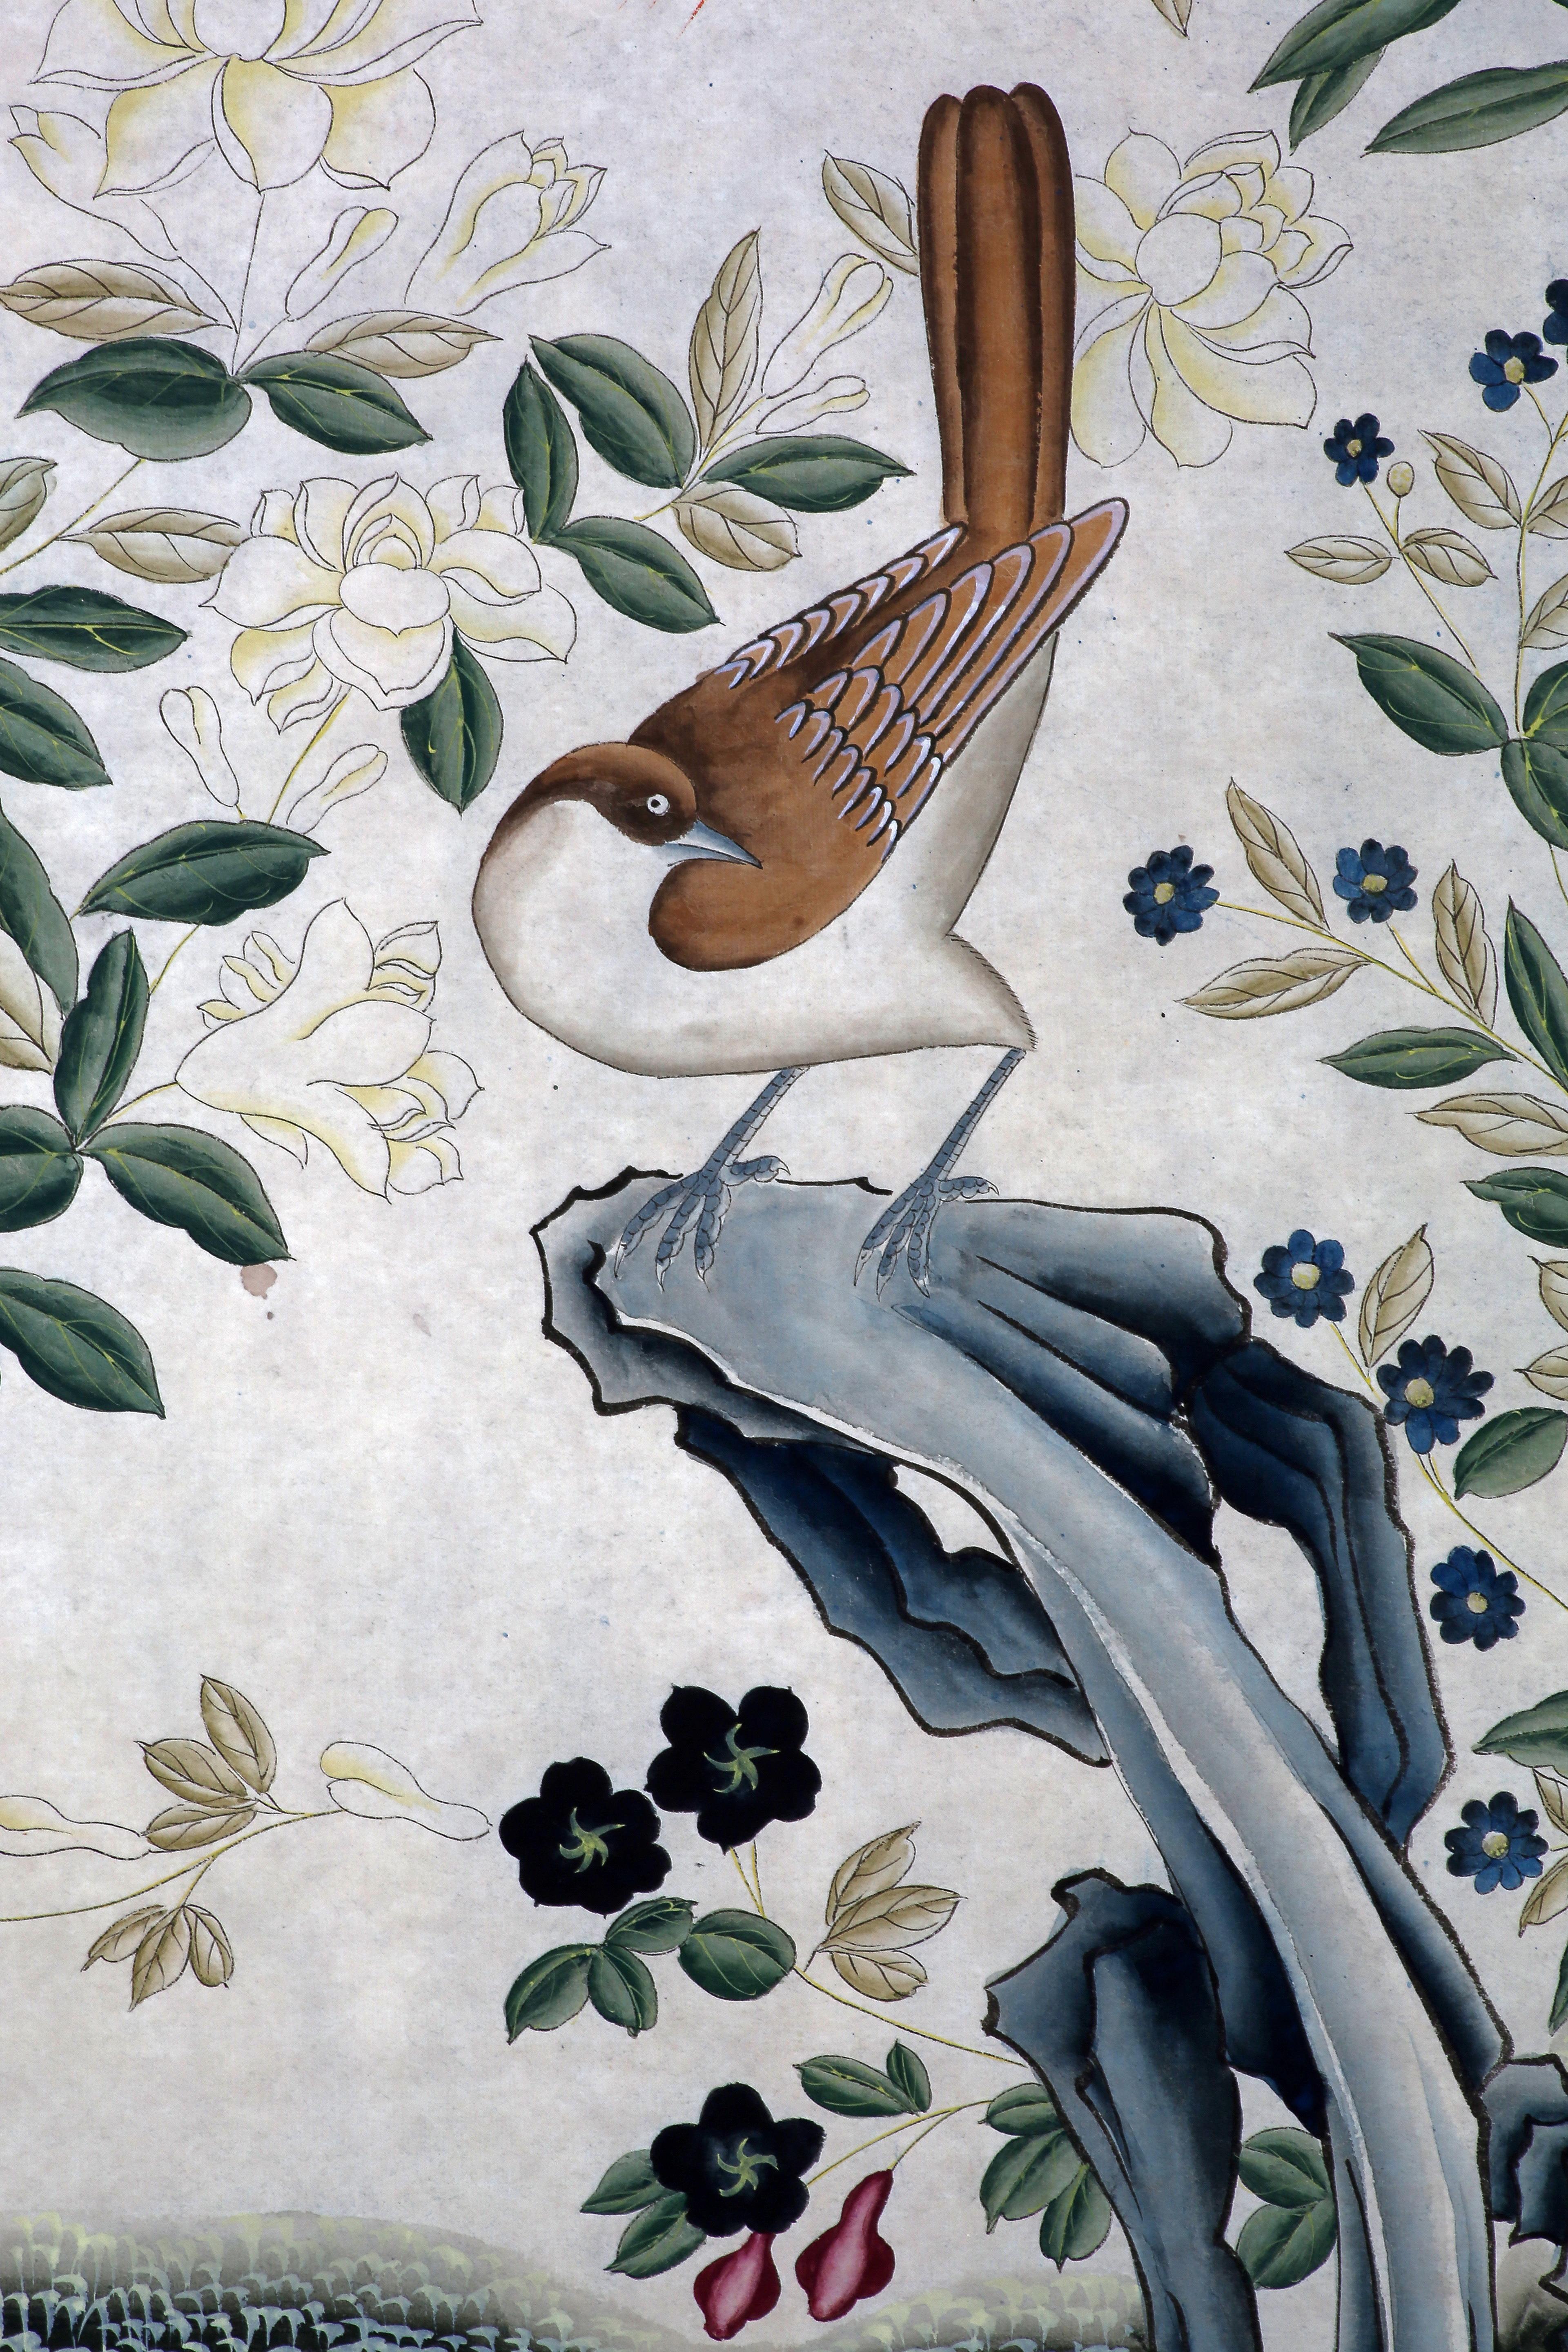 Chinoiserie Hand Painted Wallpaper Panels of Birds in a Garden Setting 6